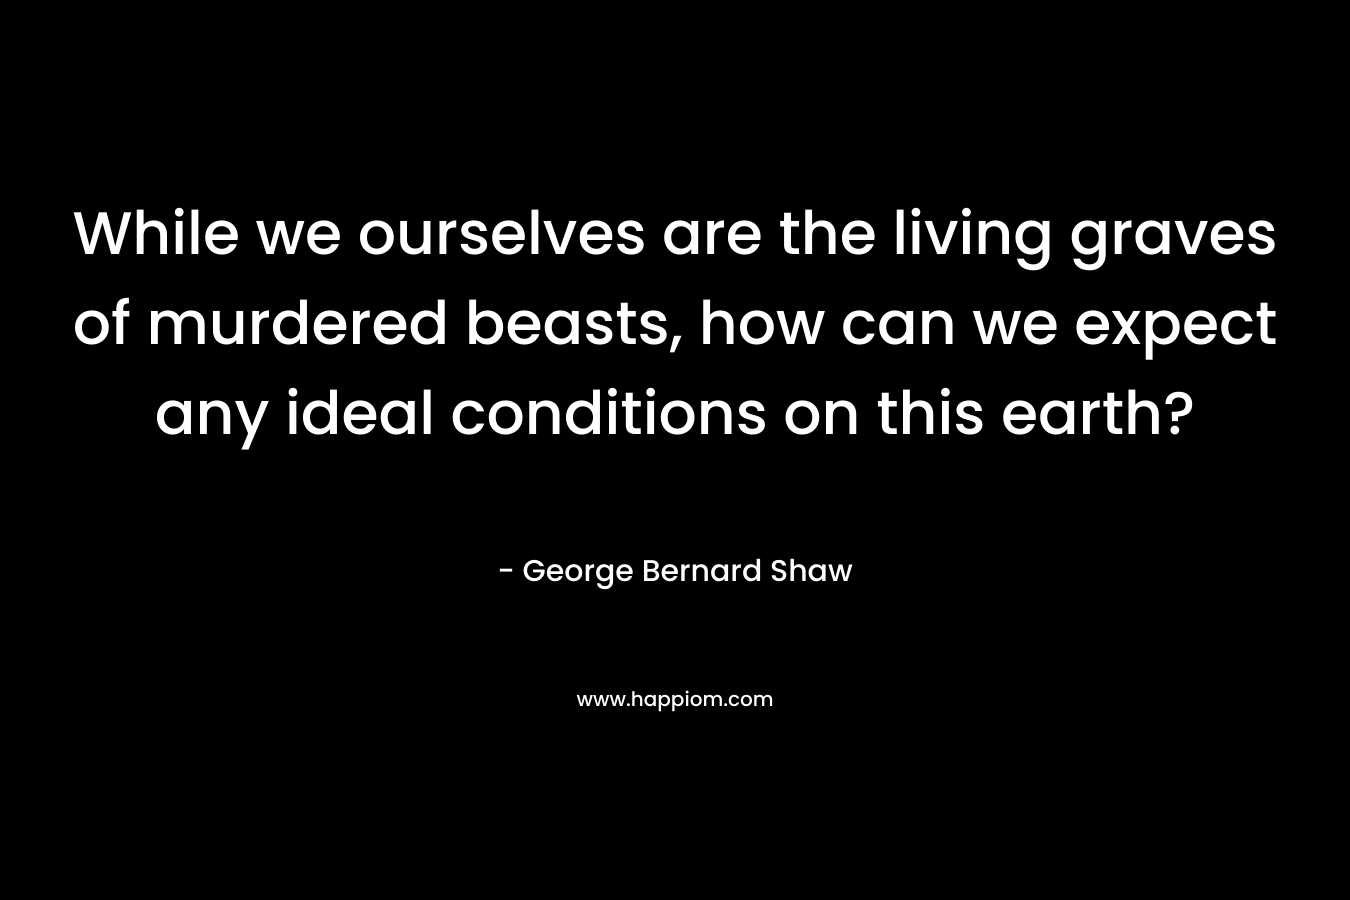 While we ourselves are the living graves of murdered beasts, how can we expect any ideal conditions on this earth? – George Bernard Shaw